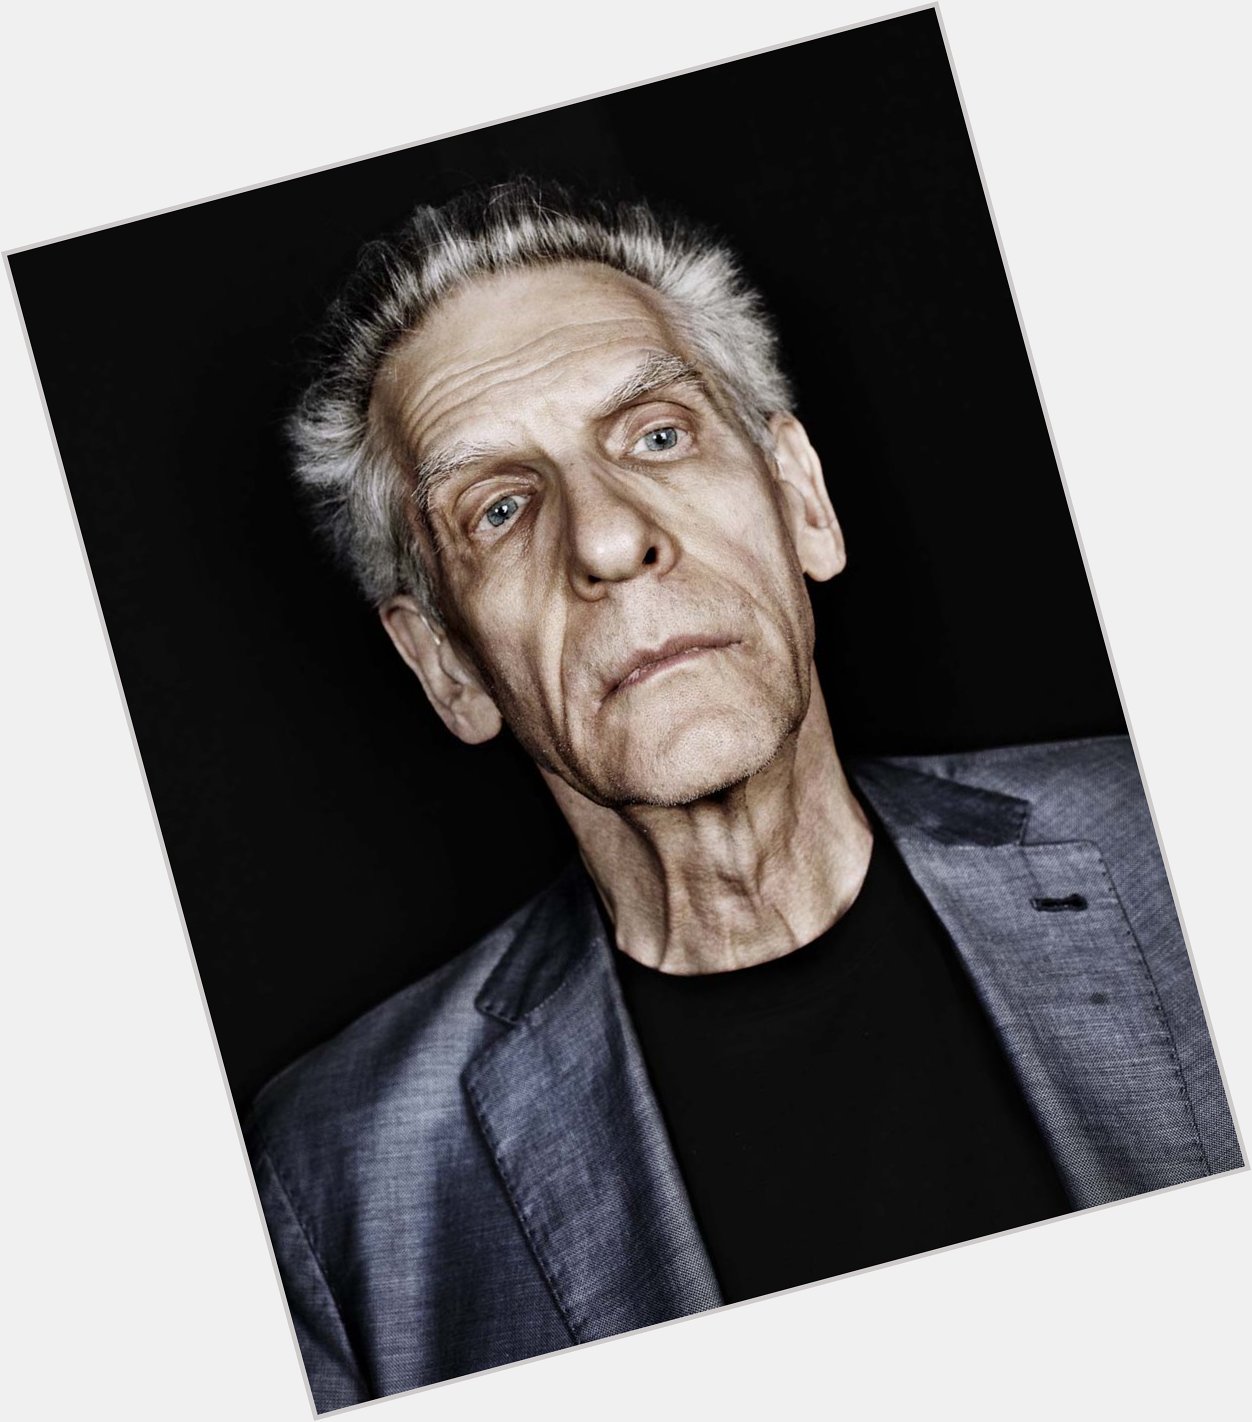 Happy birthday, David Cronenberg!

Our eight favorite scenes from the director:  